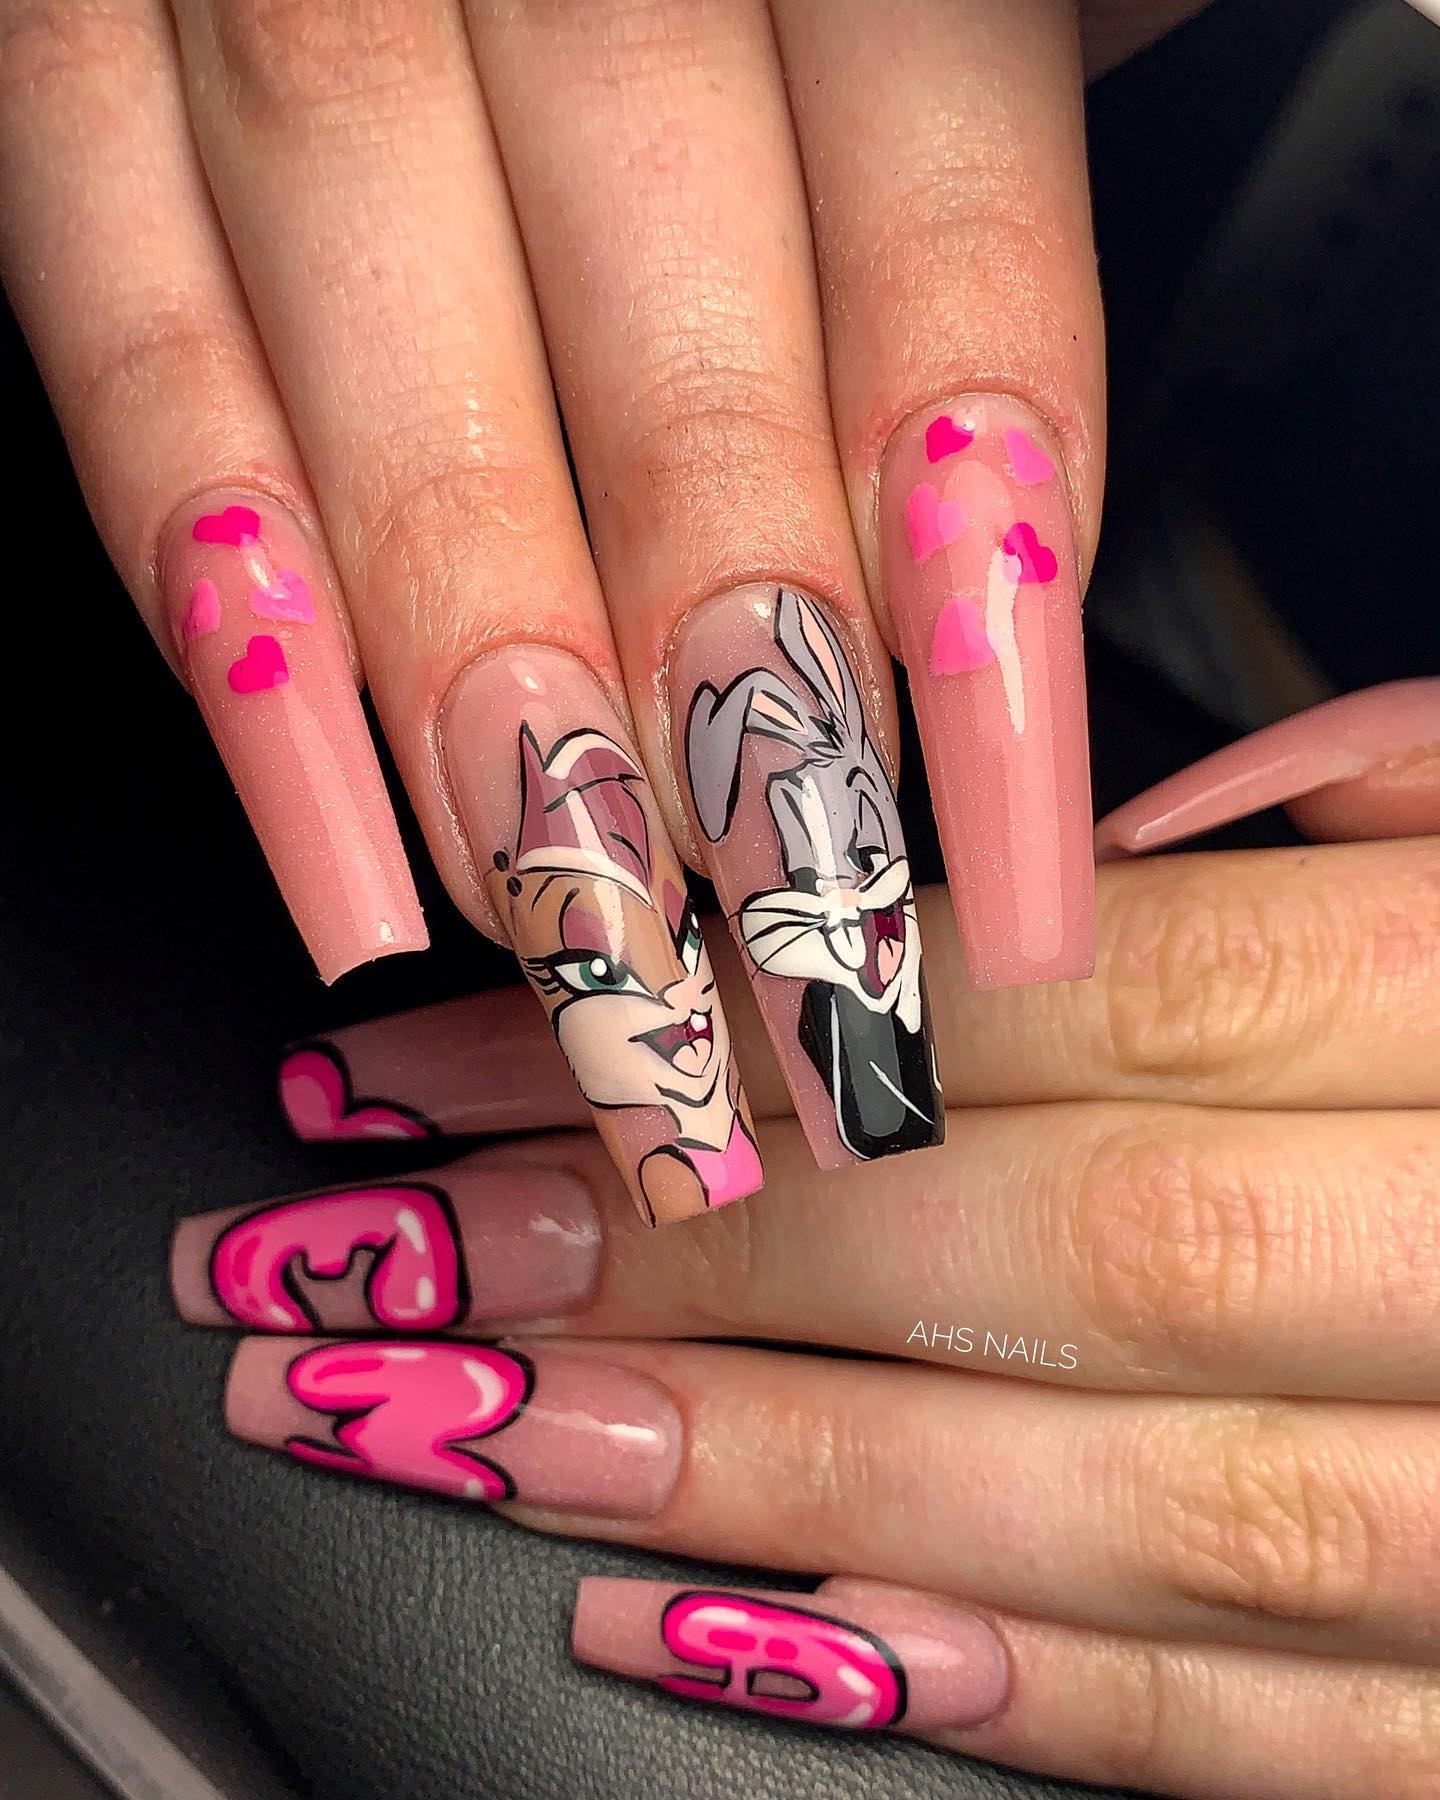 Bugs Bunny nails are a great way to express your love for the Looney Tunes character and add a little fun to your look. Pink color and hearts make this nail design so cute.